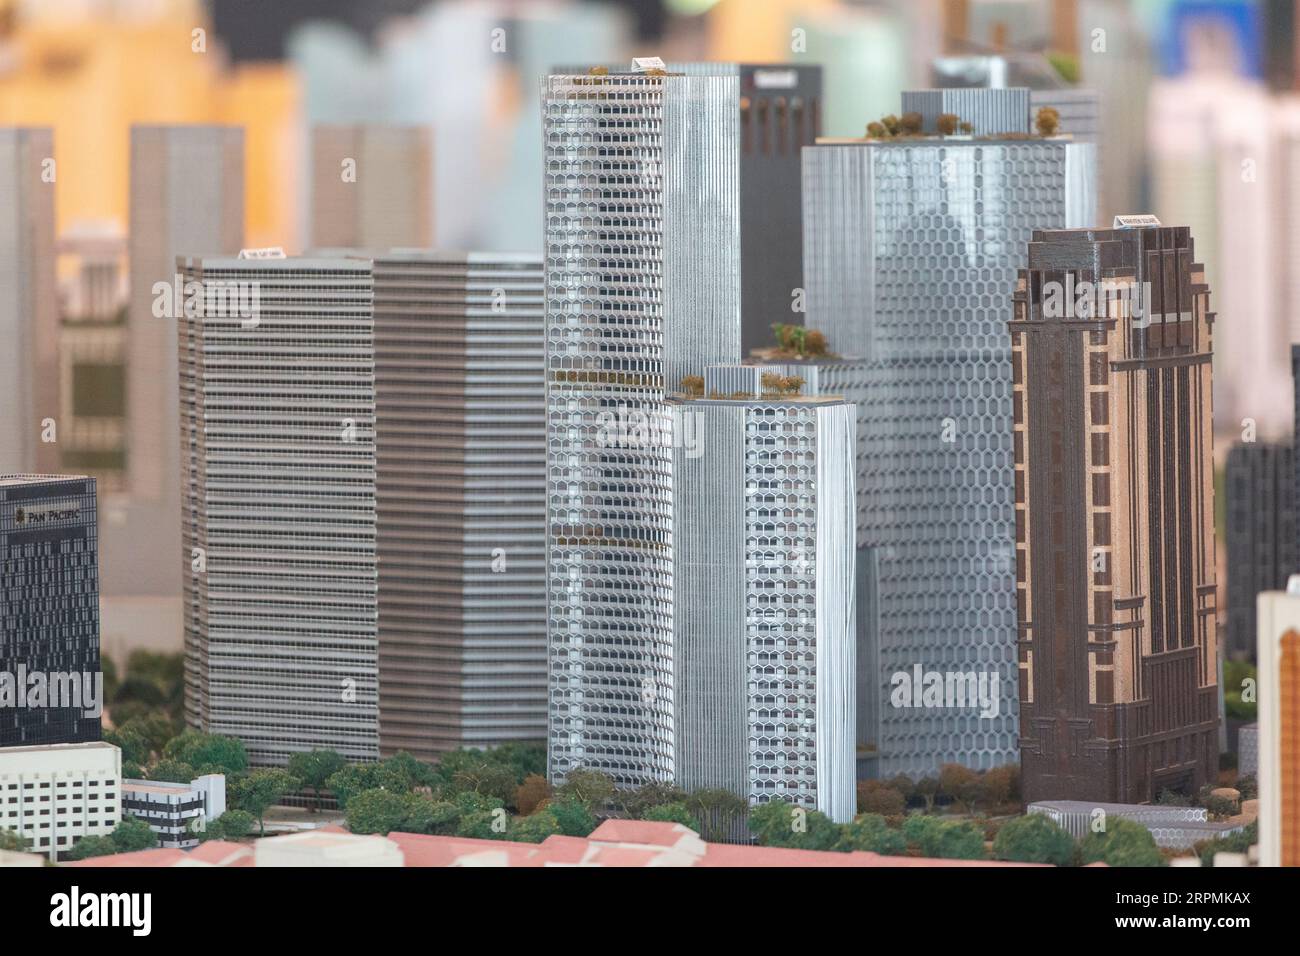 3D sand model of architecture buildings such as DUO, The Gateway, Parkview Square etc, a view of how urban planning went in Singapore. Stock Photo